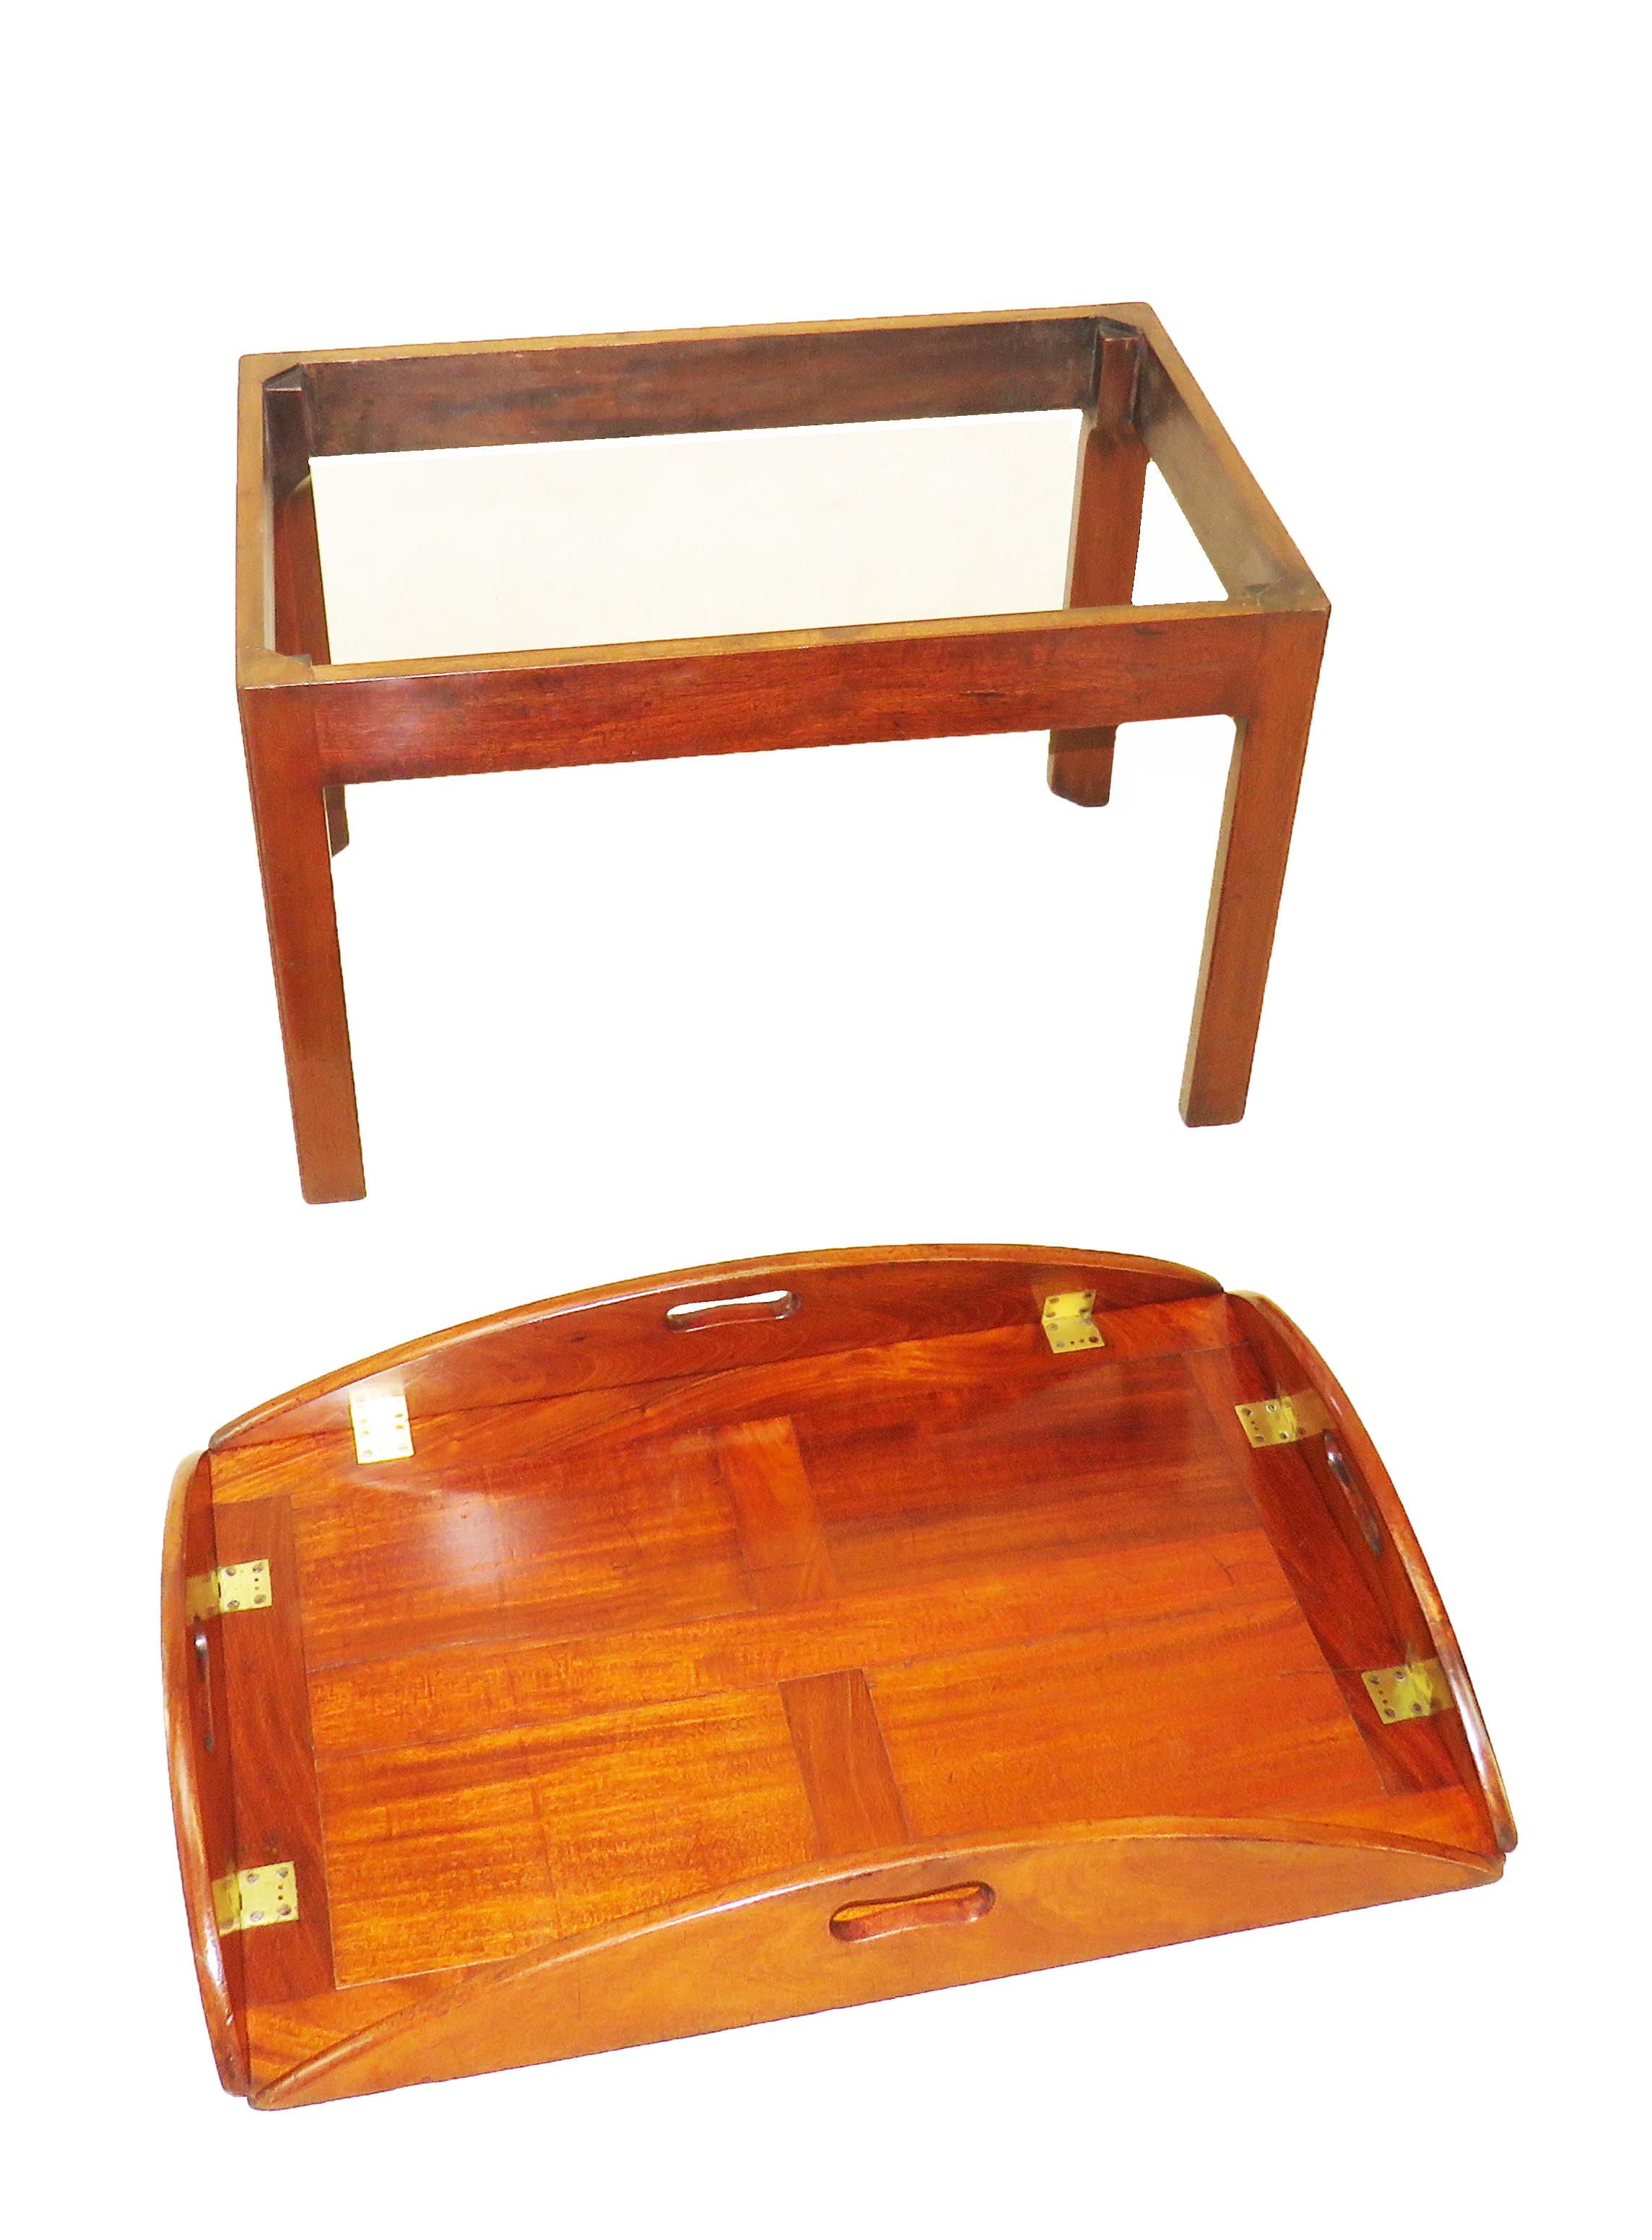 A good quality late 18th century mahogany
Oval butlers tray having well figured panels
And original brass hinges to folding sides
Housed on later mahogany square
Chamfered leg stand

(Always a great solution to the age old
problem of there